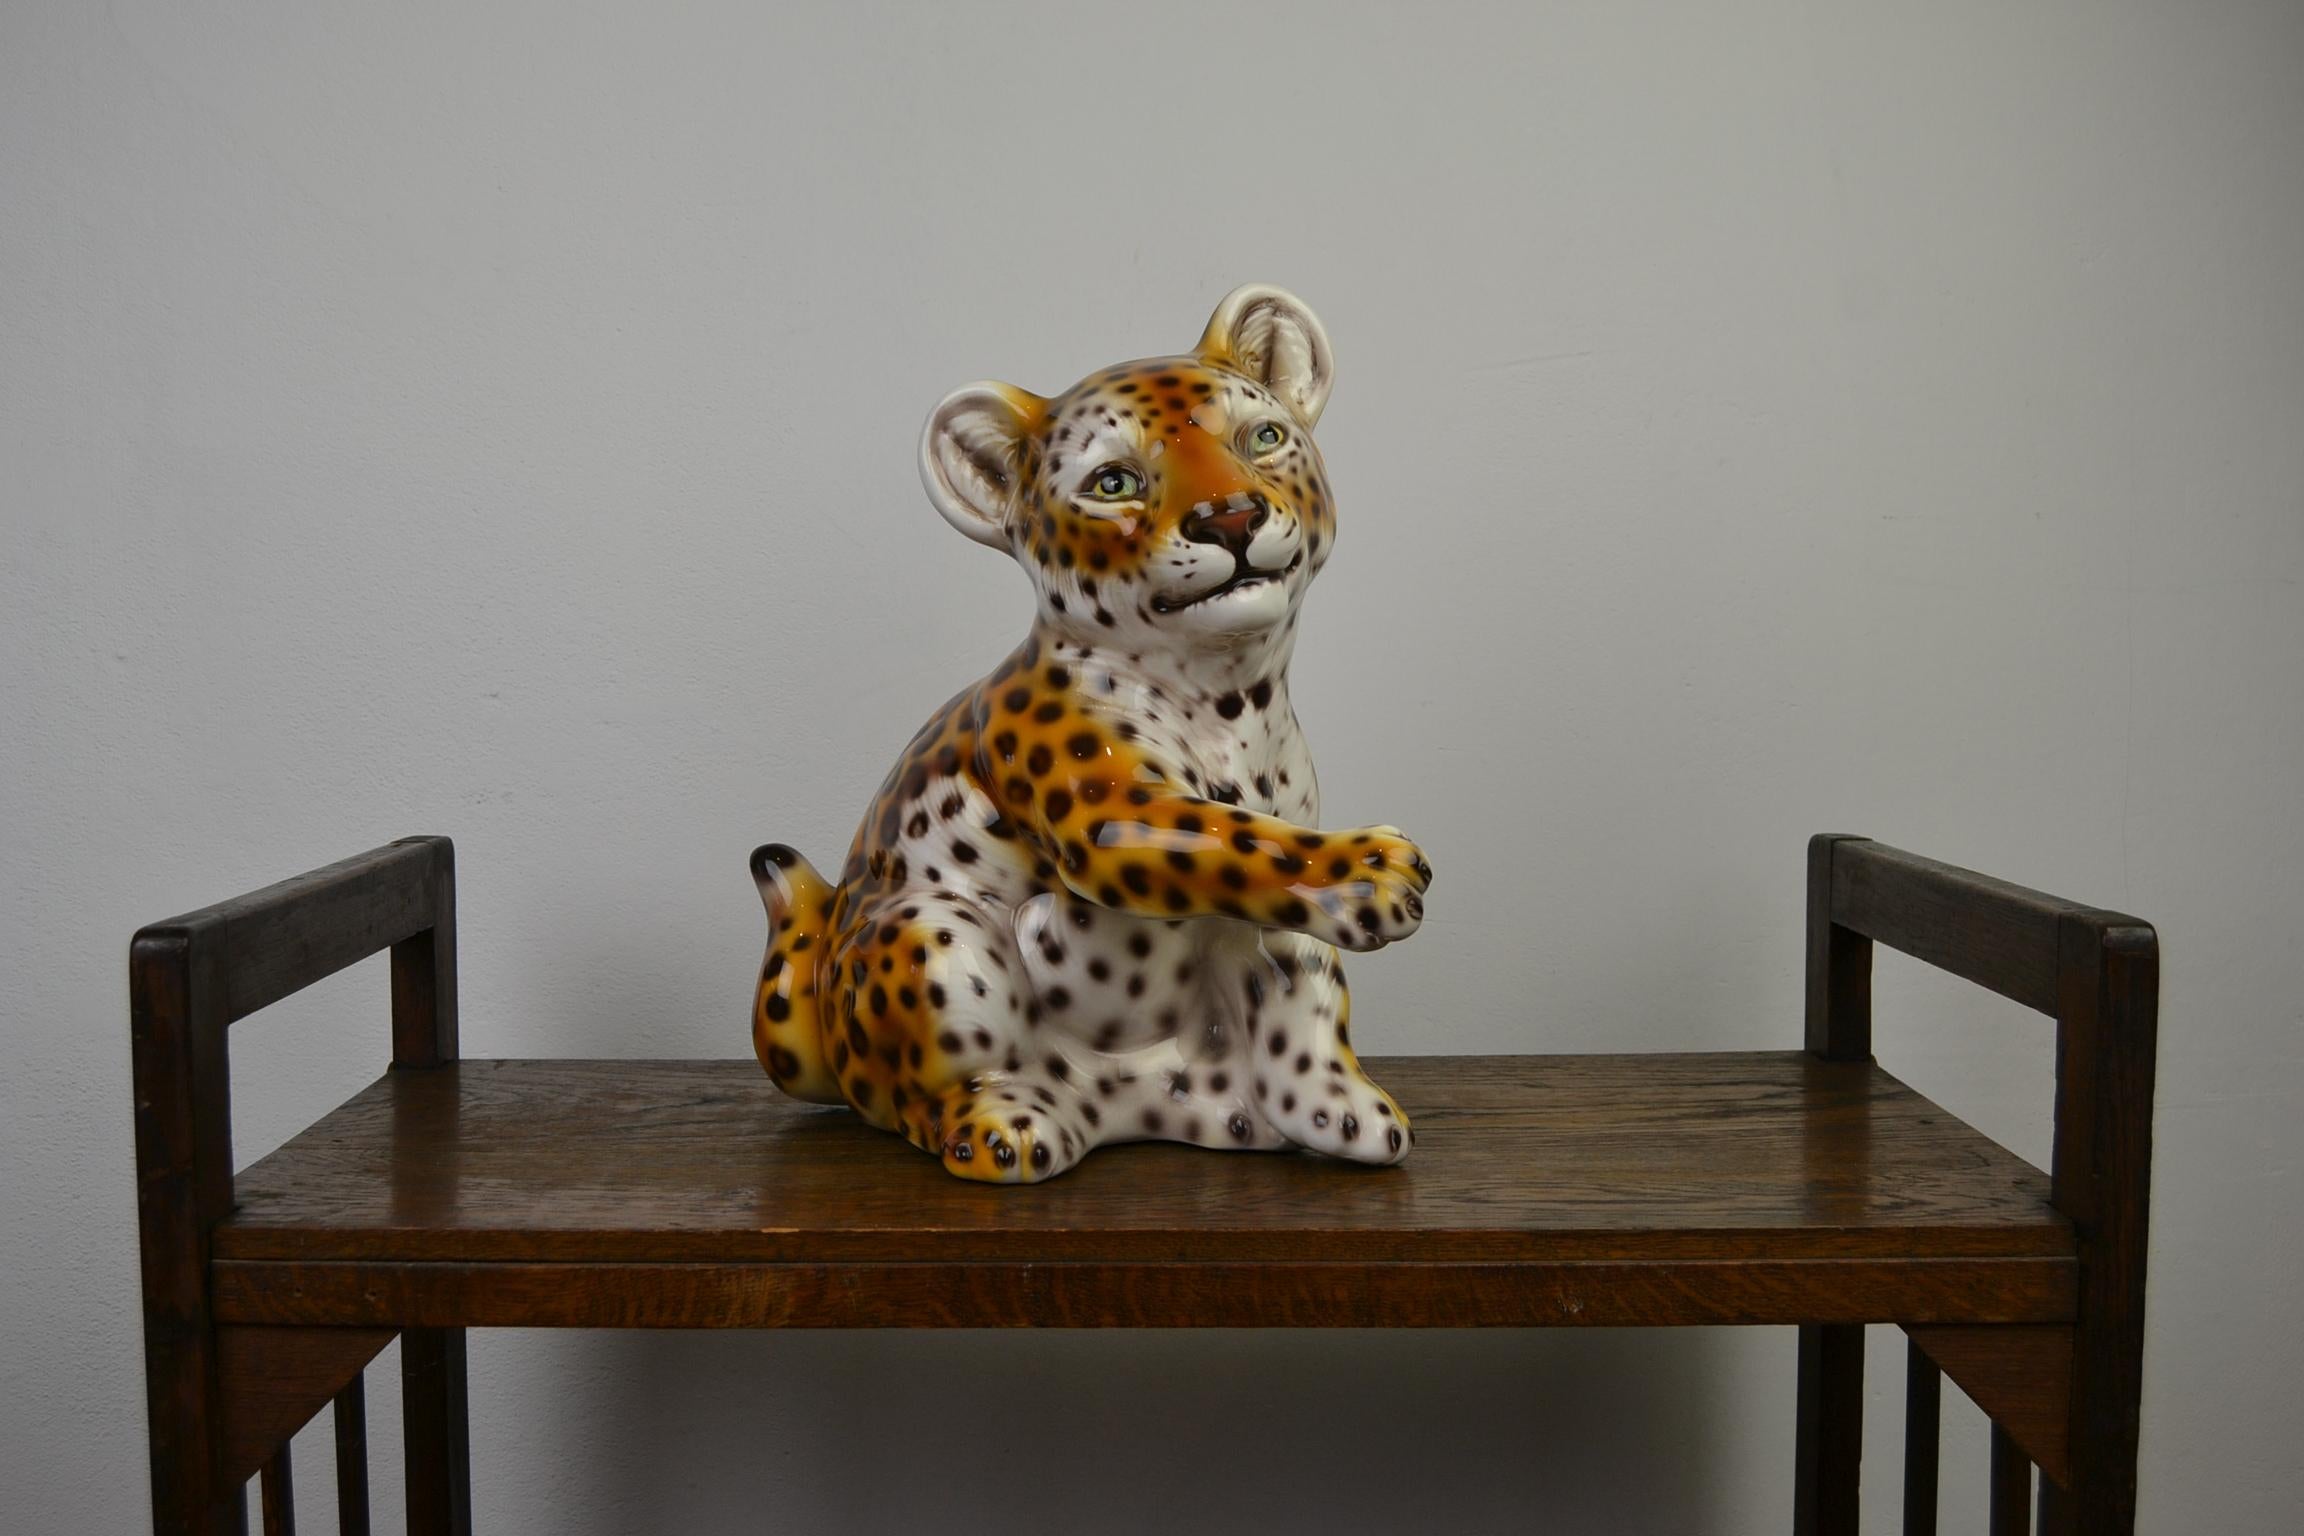 Cute looking Leopard Sculpture - made in Italy.
This Porcelain Animal Sculpture - Wild Animal is Hand-Painted - circa 1970s. 
Still in very good vintage Condition, no cracks.
Sitting in a lovely Position so you almost want to cuddle him the whole